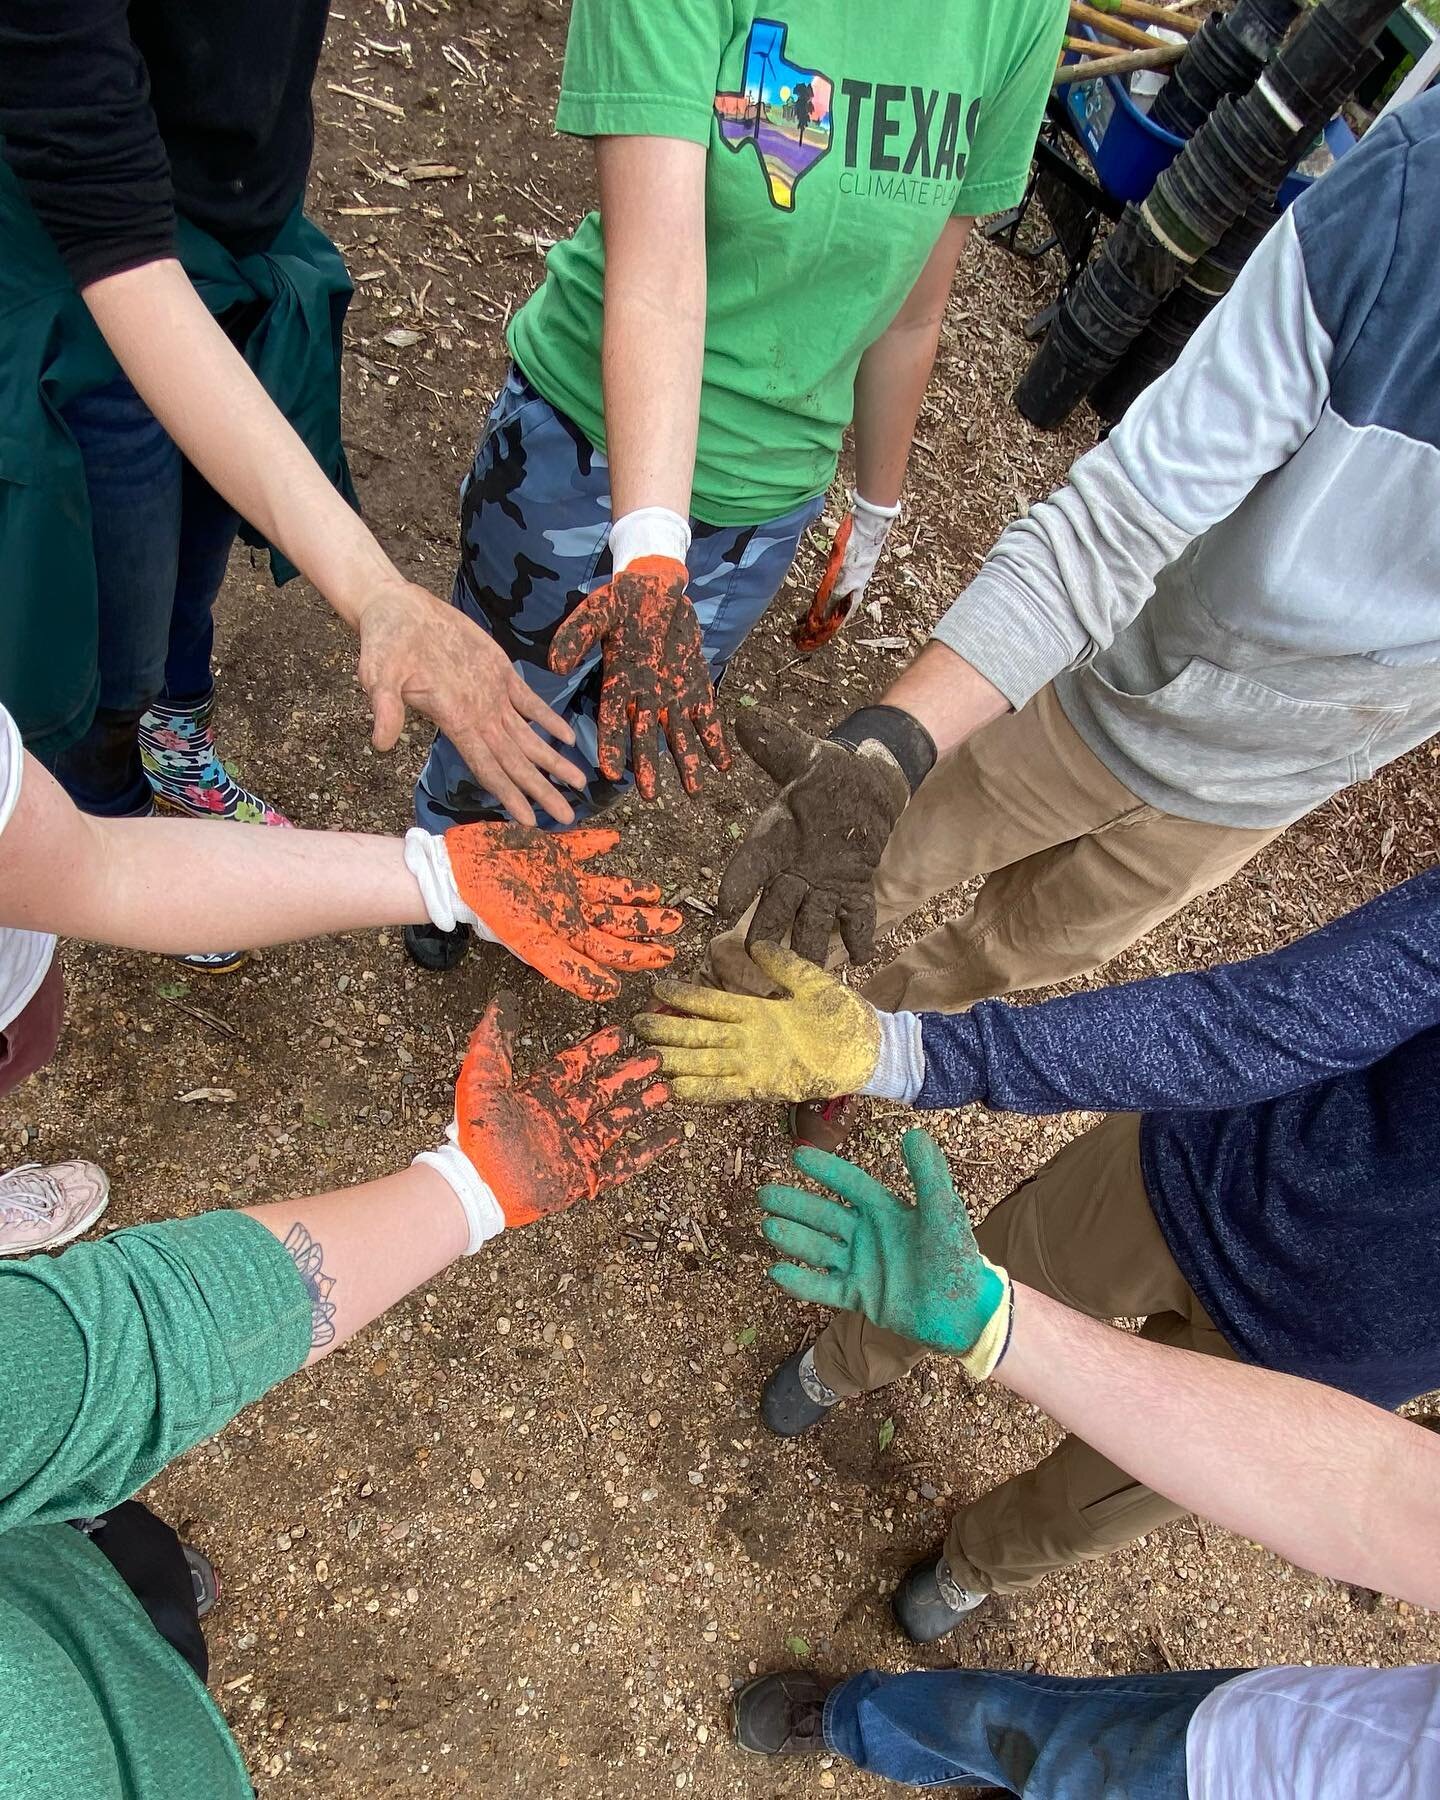 We had an awesome time yesterday getting our hands dirty at @esoterraculinary! Together with @kyndrylglobal, students from @cuboulderenvd, our #TreeTender volunteers and thanks to @onetreeplanted, we added about 200 seedlings 🌱 from @harlequinsgarde